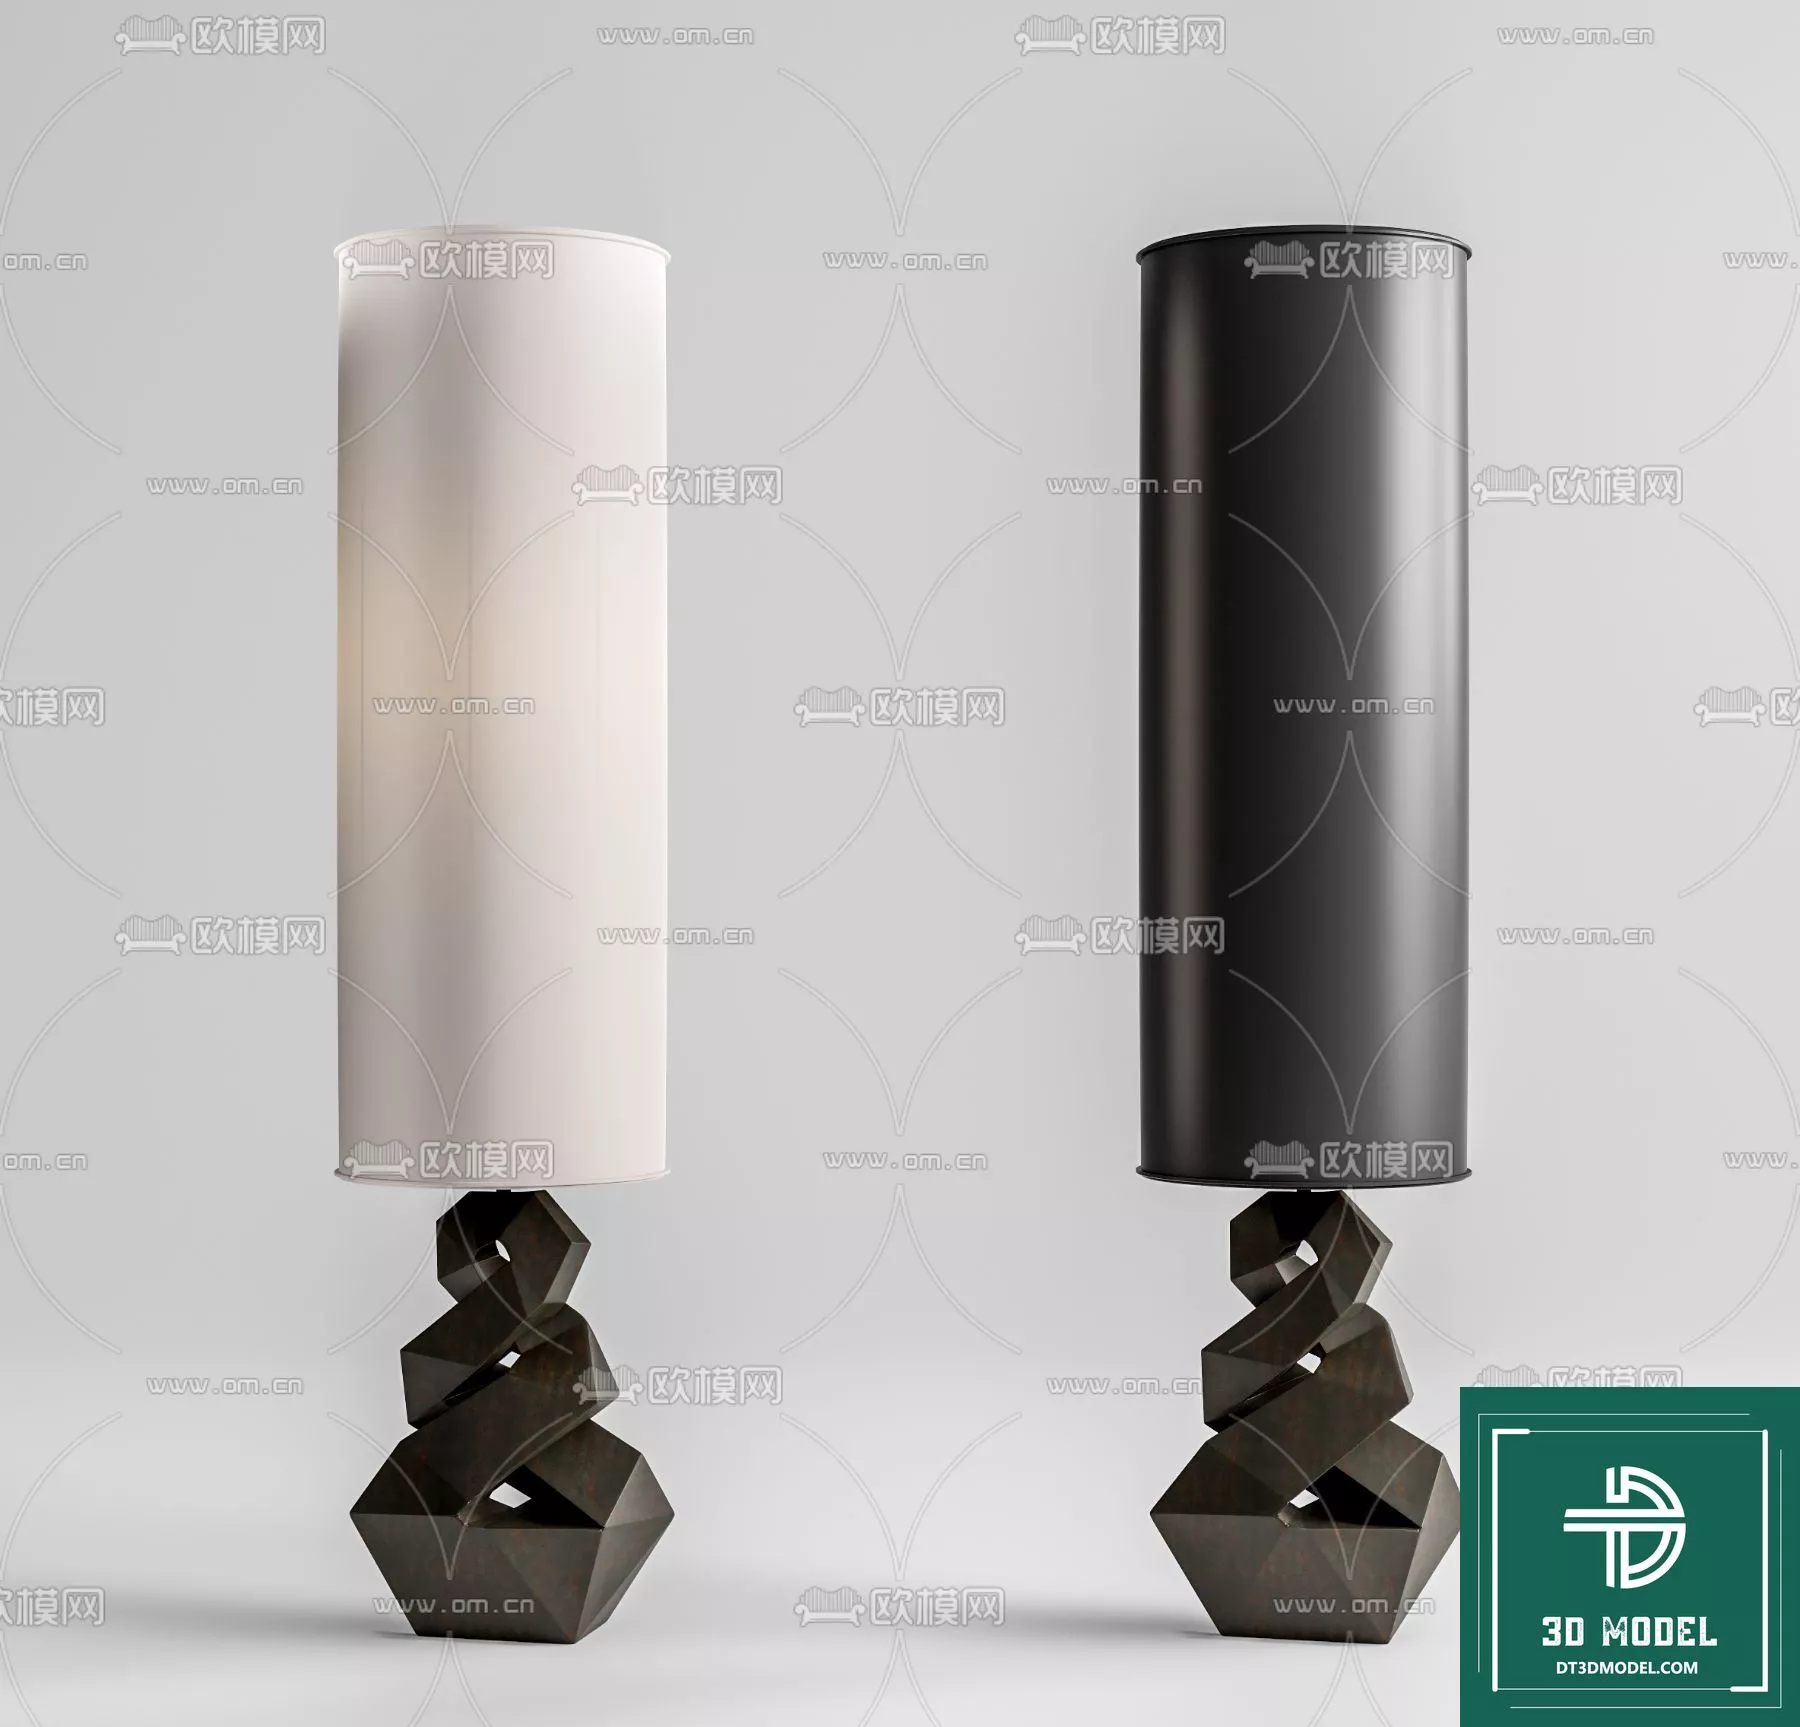 MODERN TABLE LAMP - SKETCHUP 3D MODEL - VRAY OR ENSCAPE - ID14620